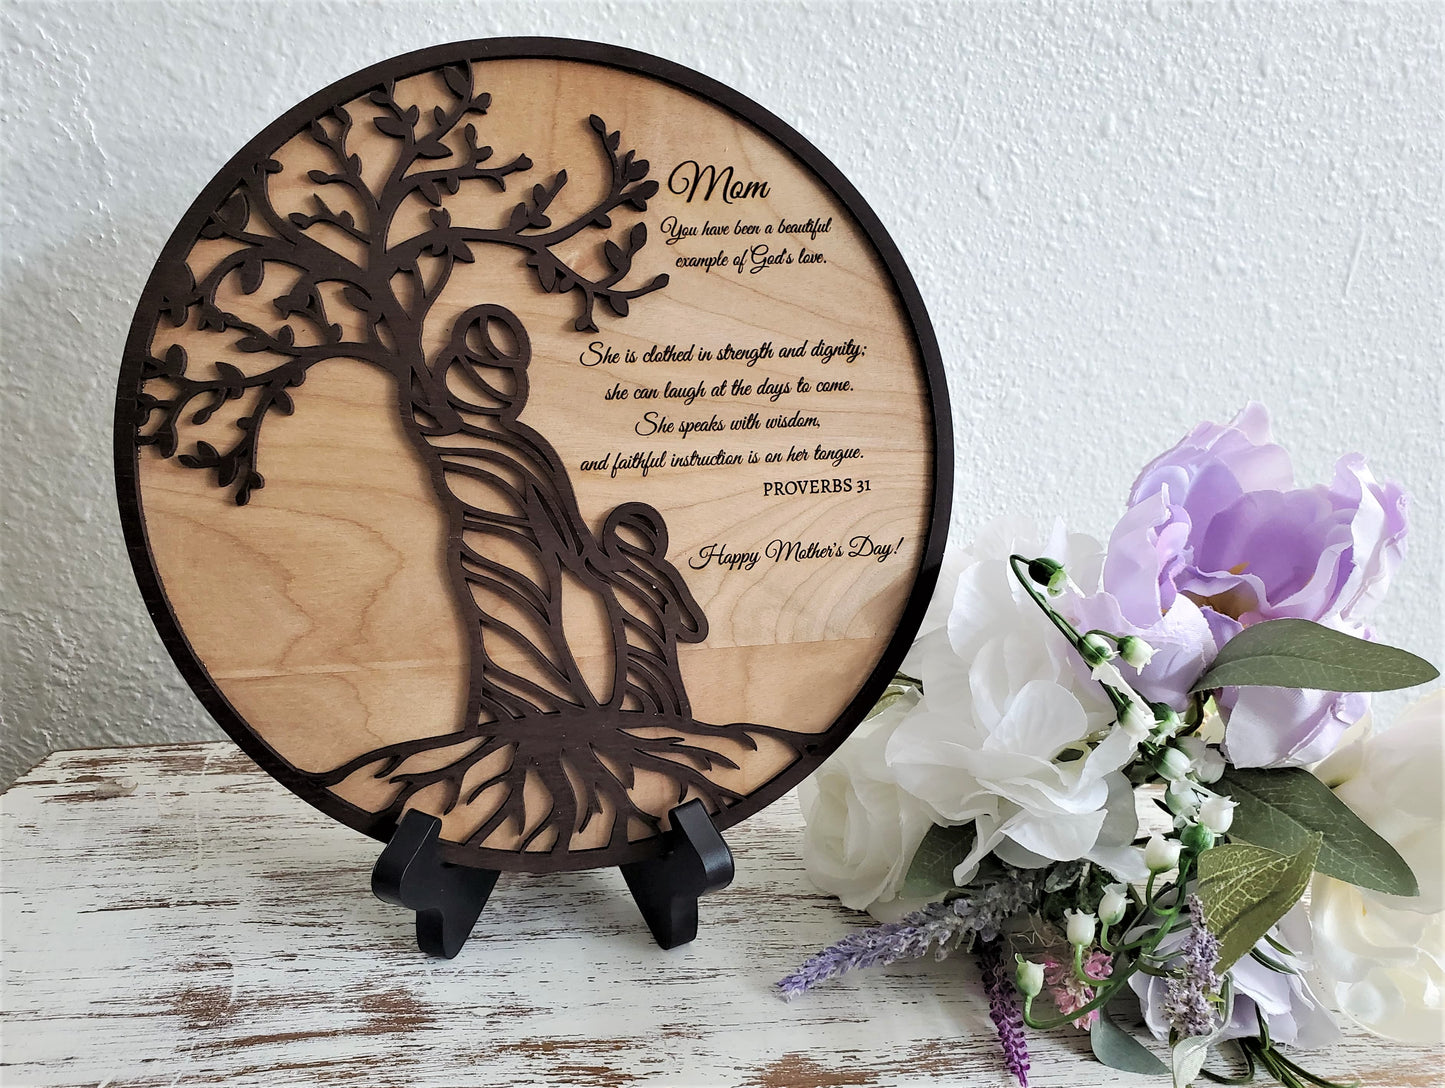 Proverbs 31 Wood Carved Plaque